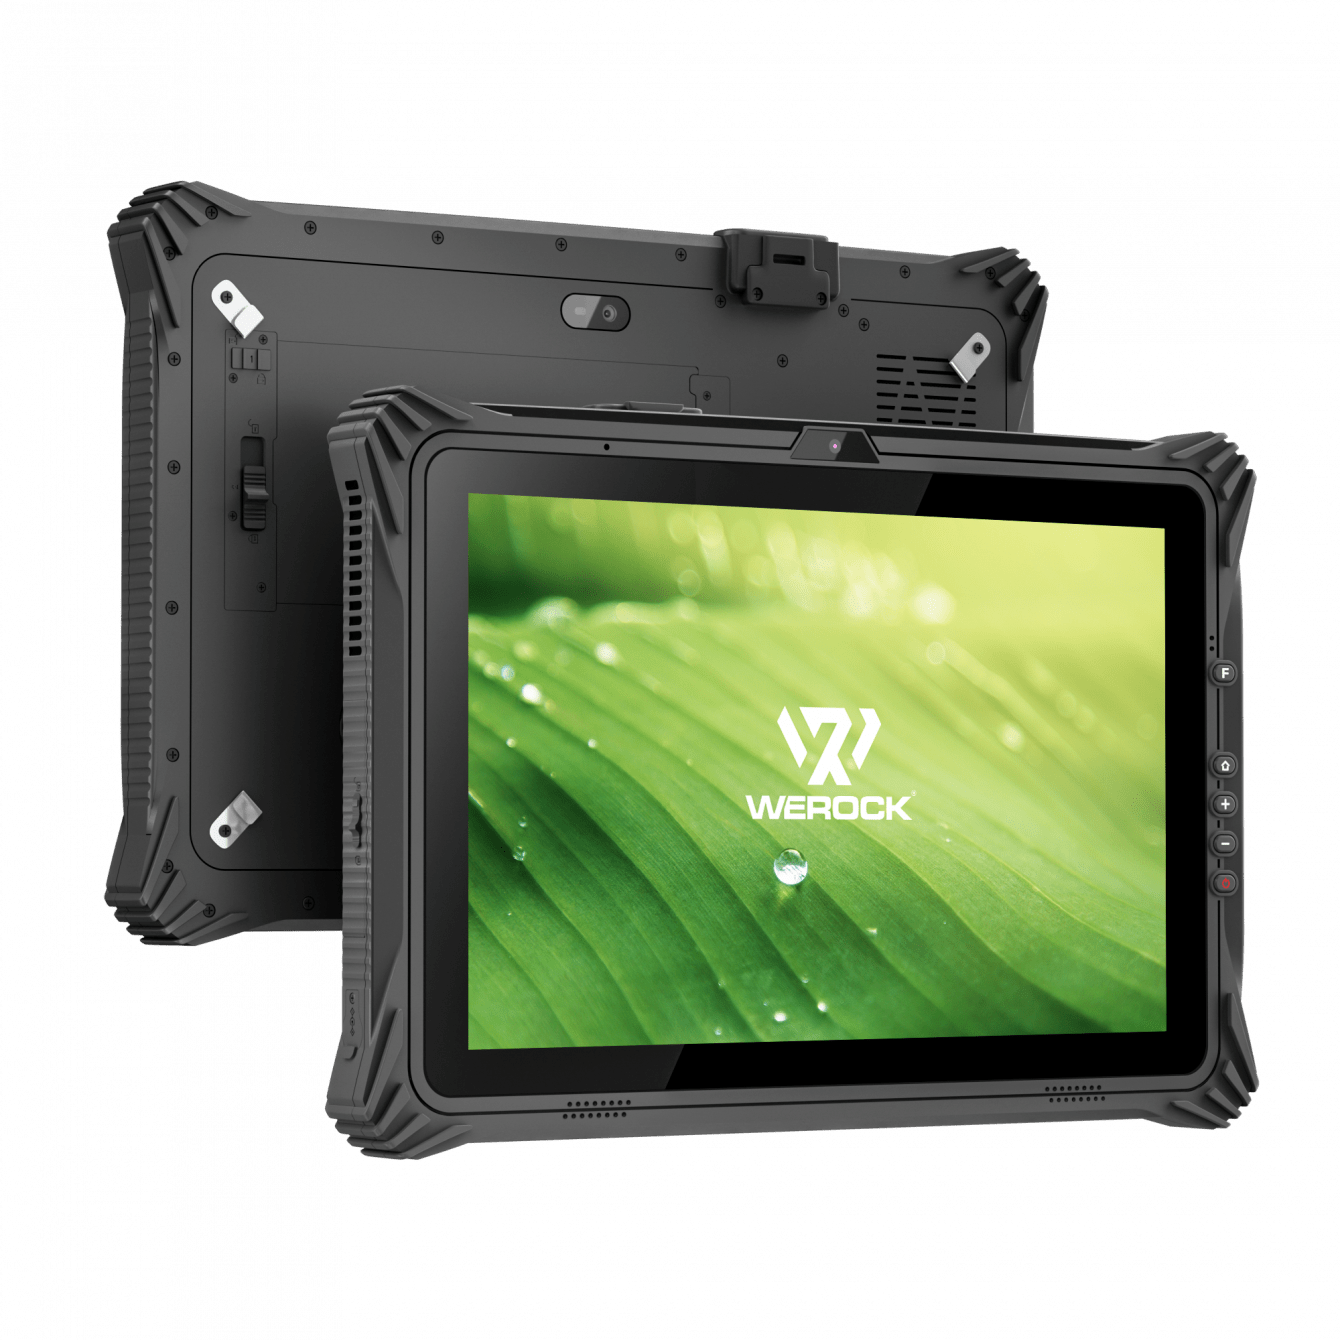 WEROCK: introduces three new industrial tablets, robust and powerful